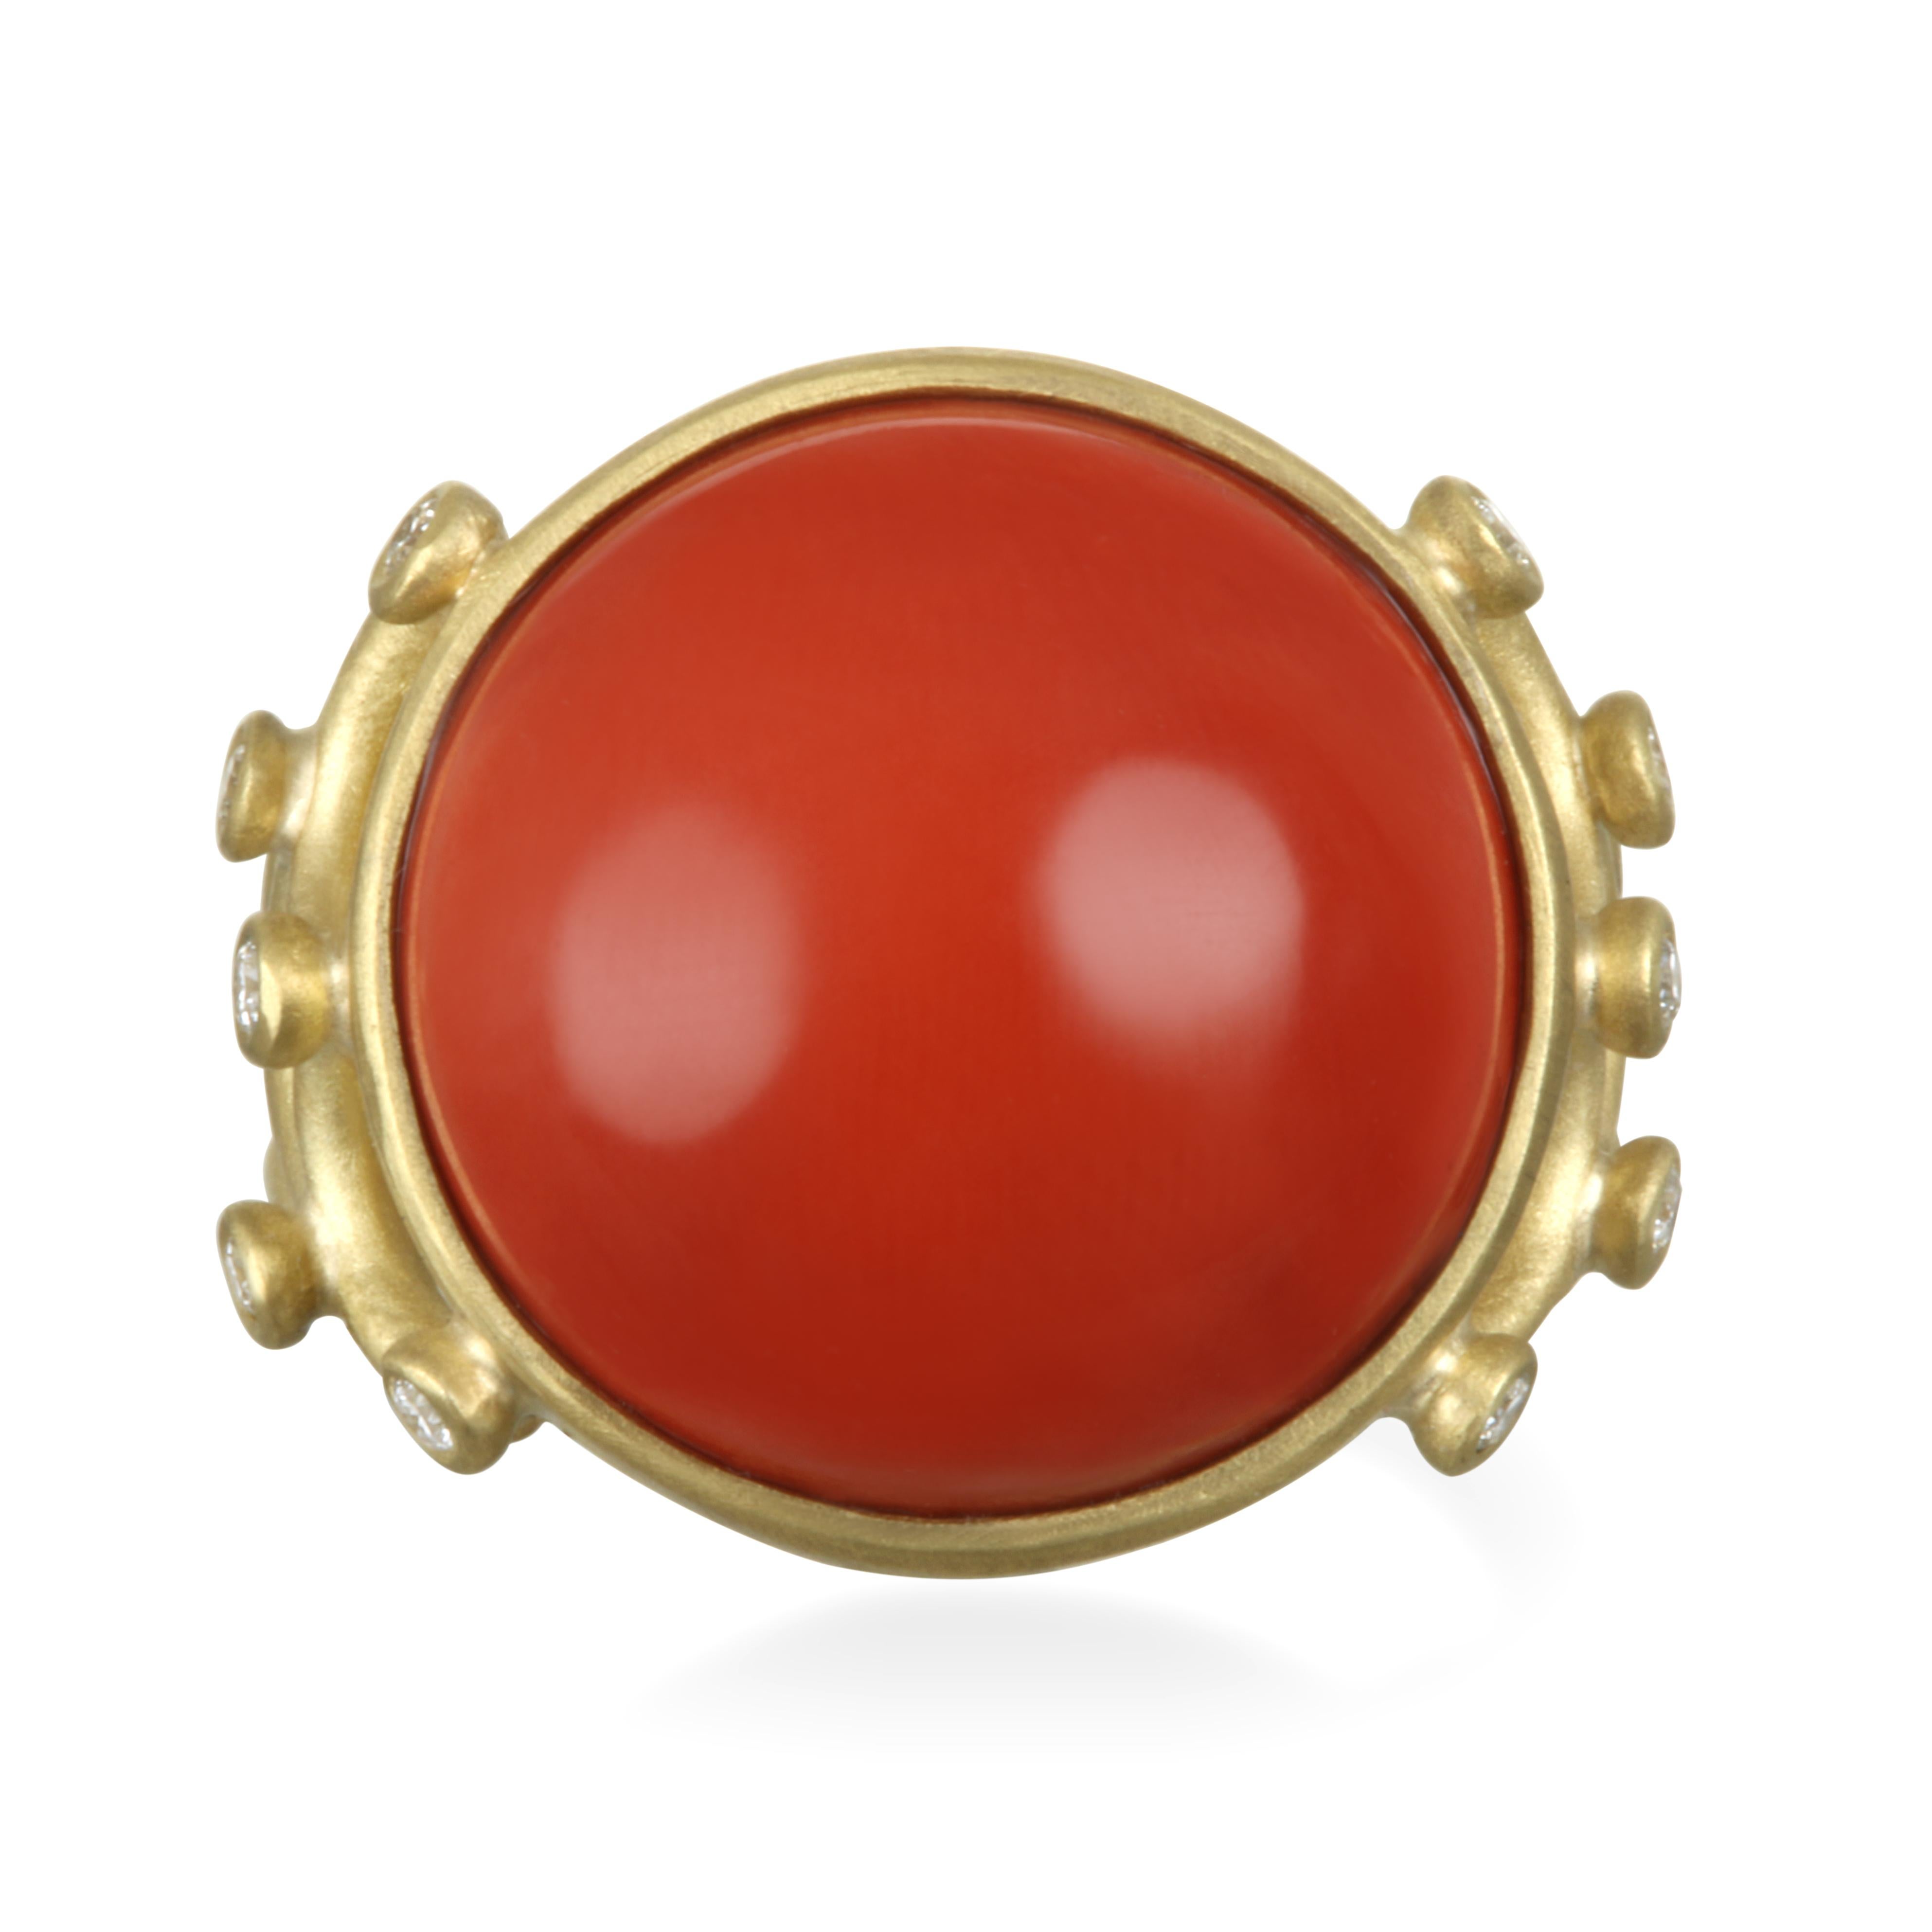 Faye Kim's 18k gold* fiery red coral ring is one of a kind. Coral, which is said to invoke passion, enthusiasm, and optimism in the wearer, has been beautifully handcrafted here by Kim and accented with scallop bezel detail and white diamonds. This